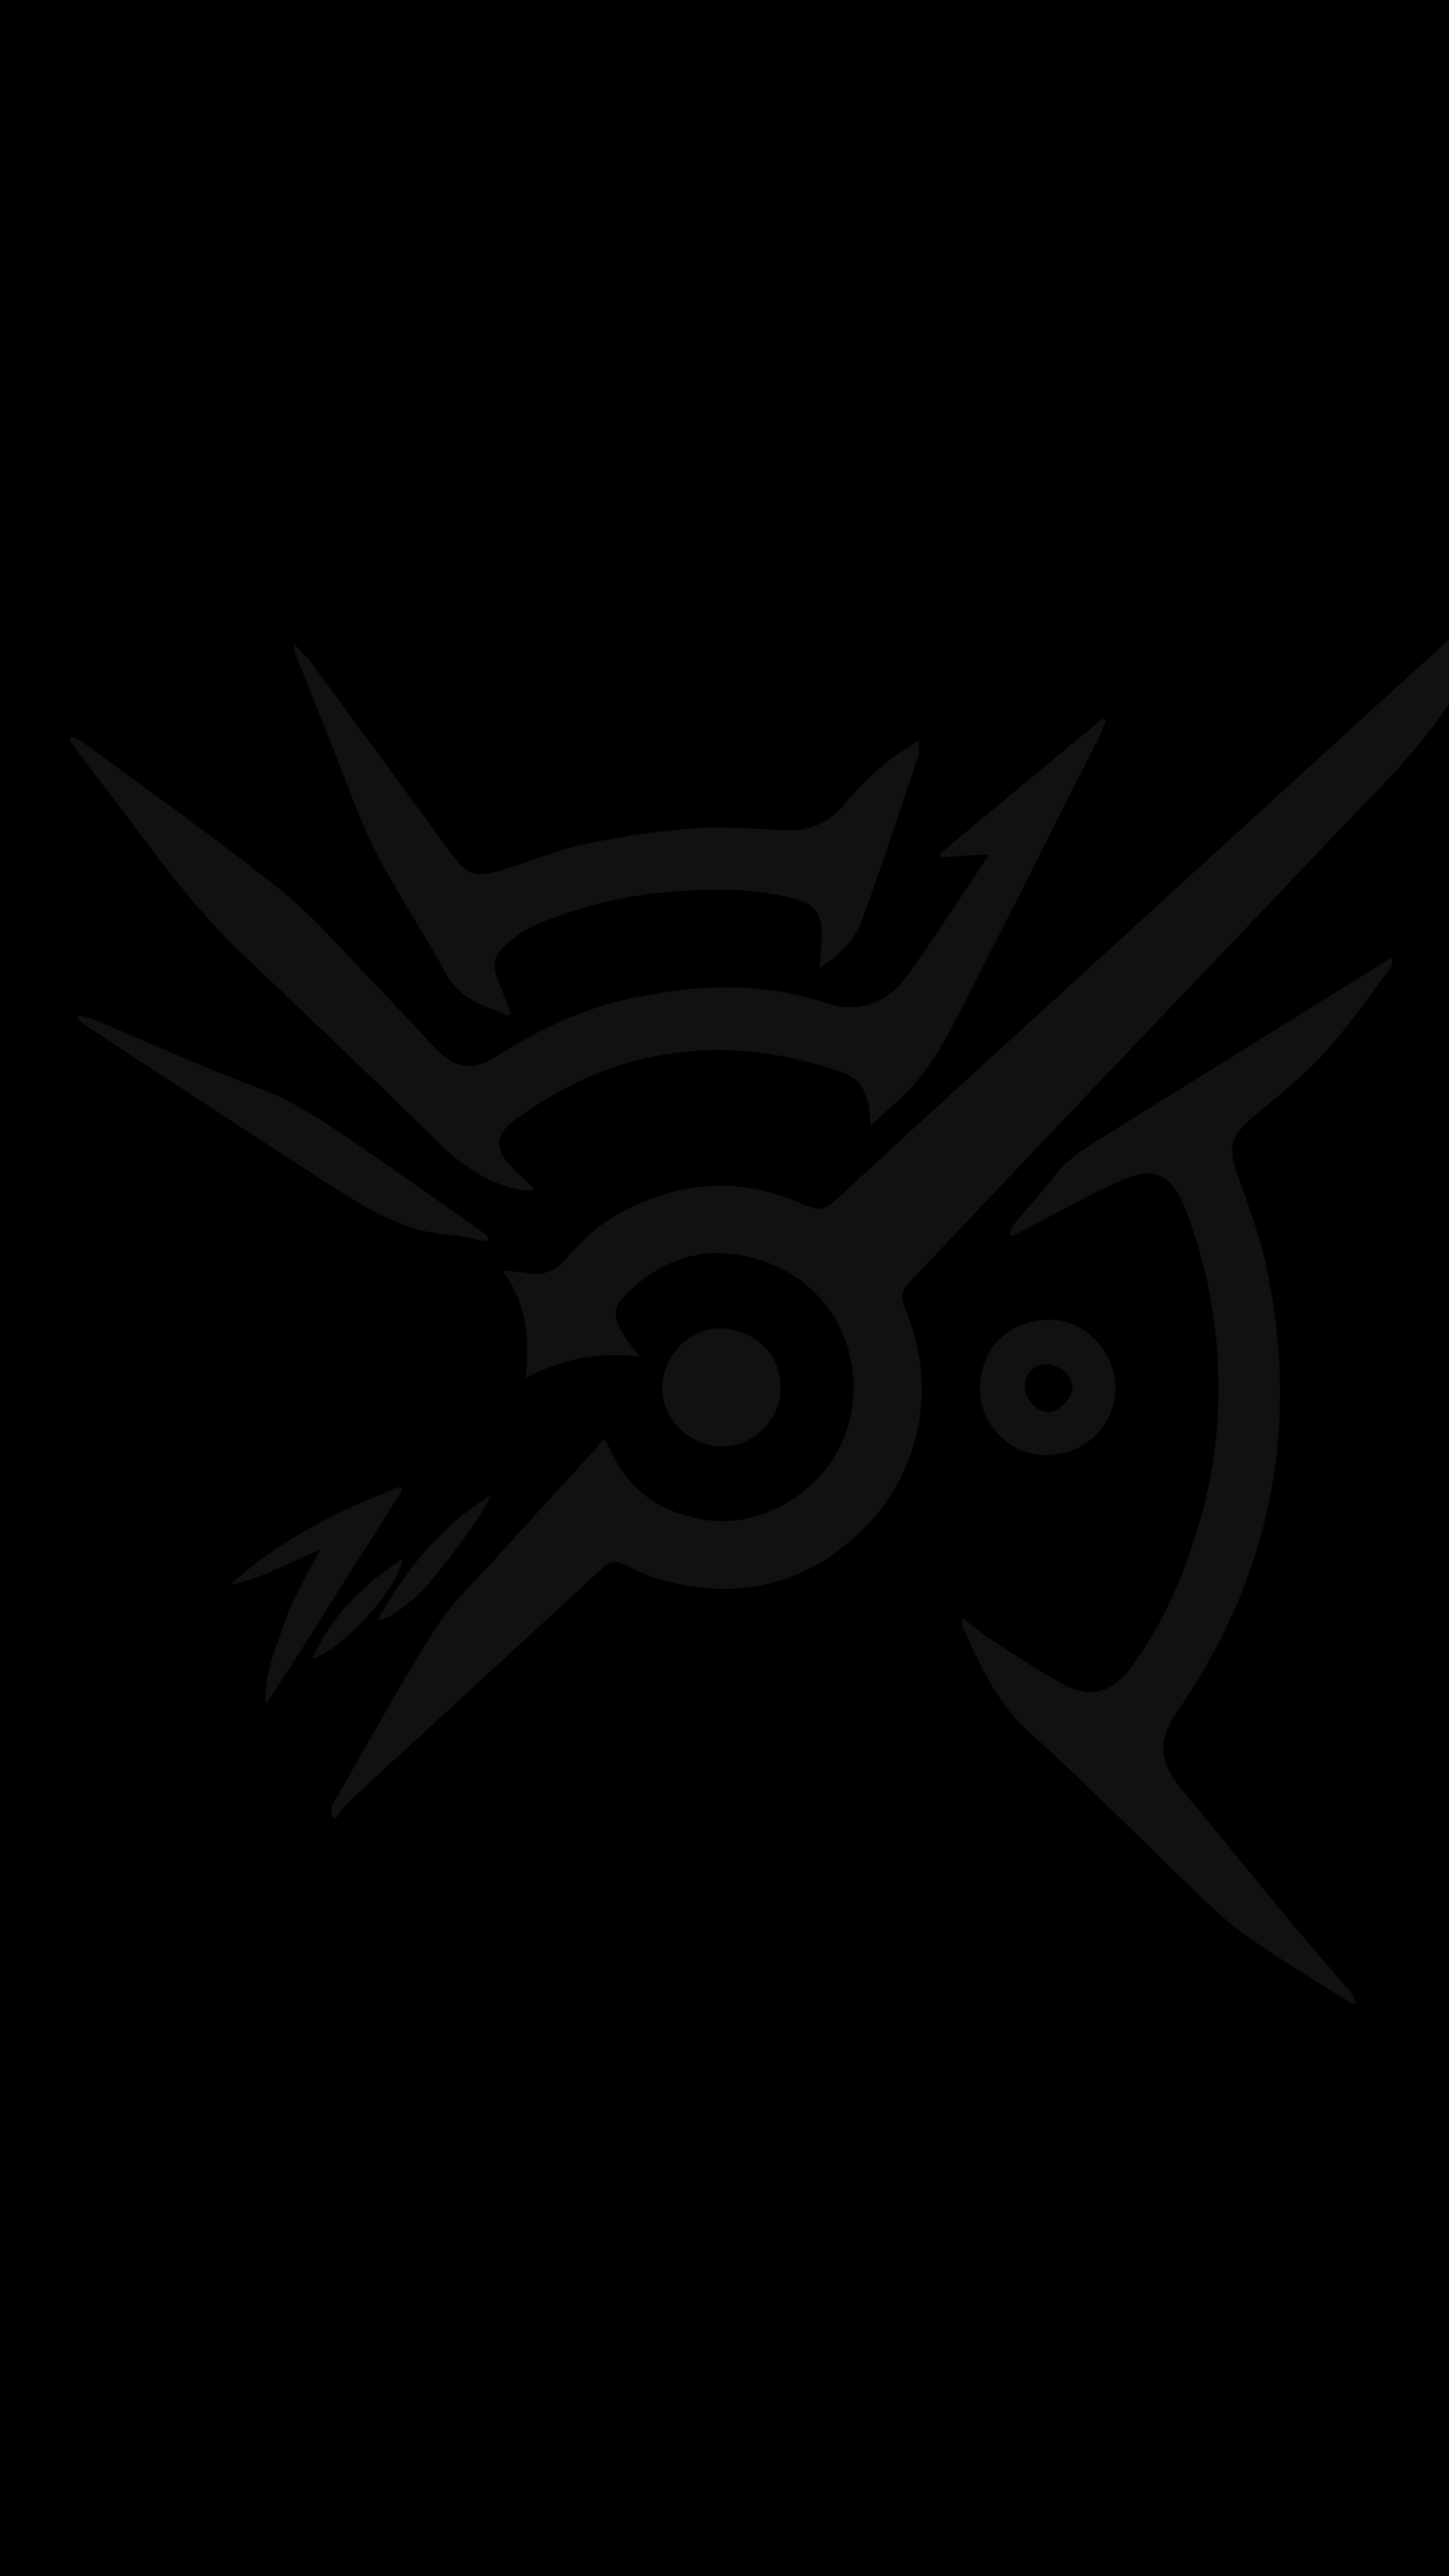 Dishonored logo on black screen, dark. - Mobile Abyss